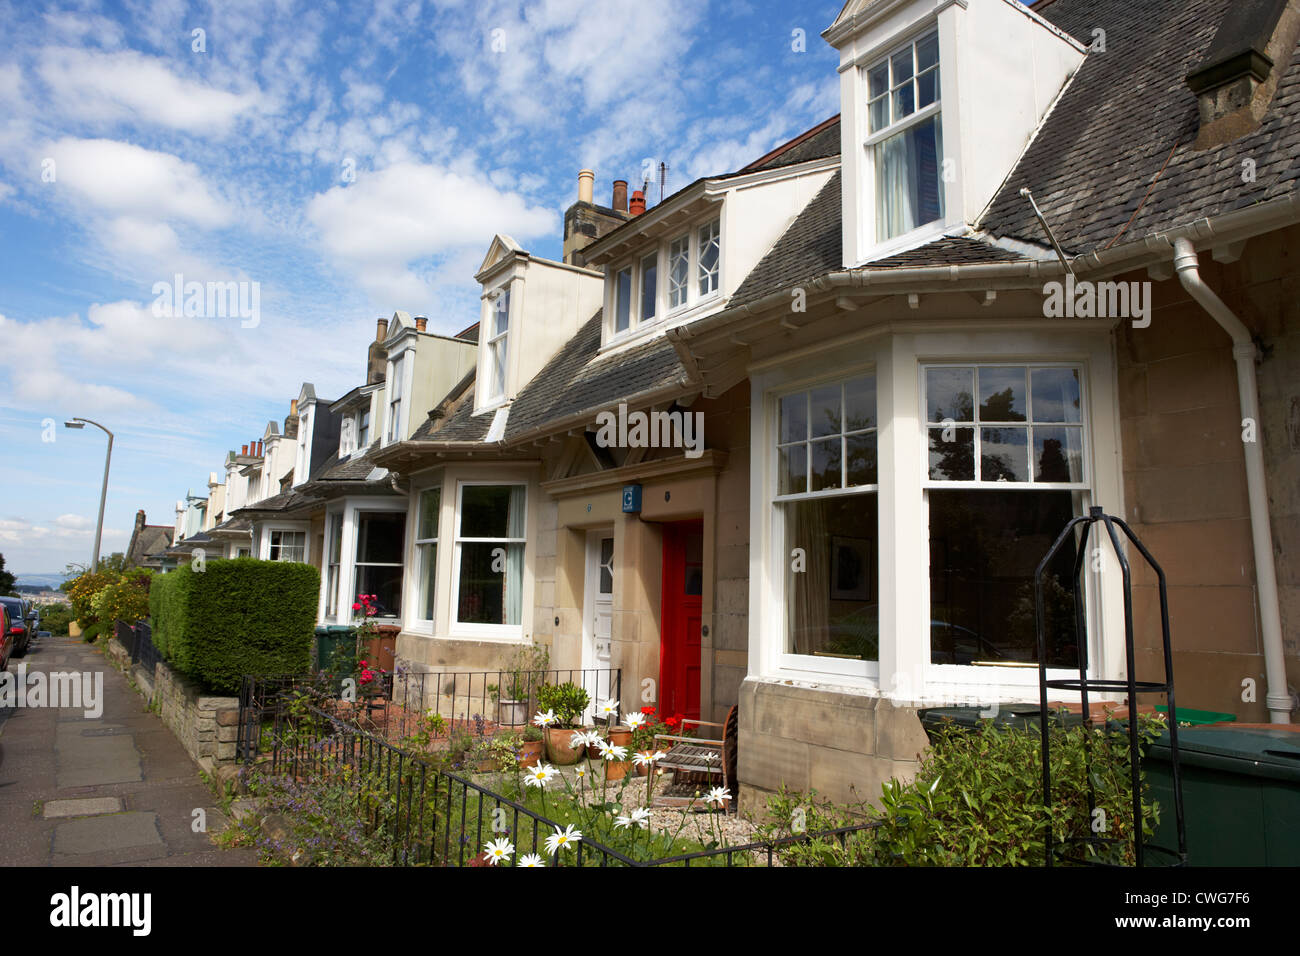 properties on craighouse road in residential victorian area of edinburgh, scotland, uk, united kingdom Stock Photo